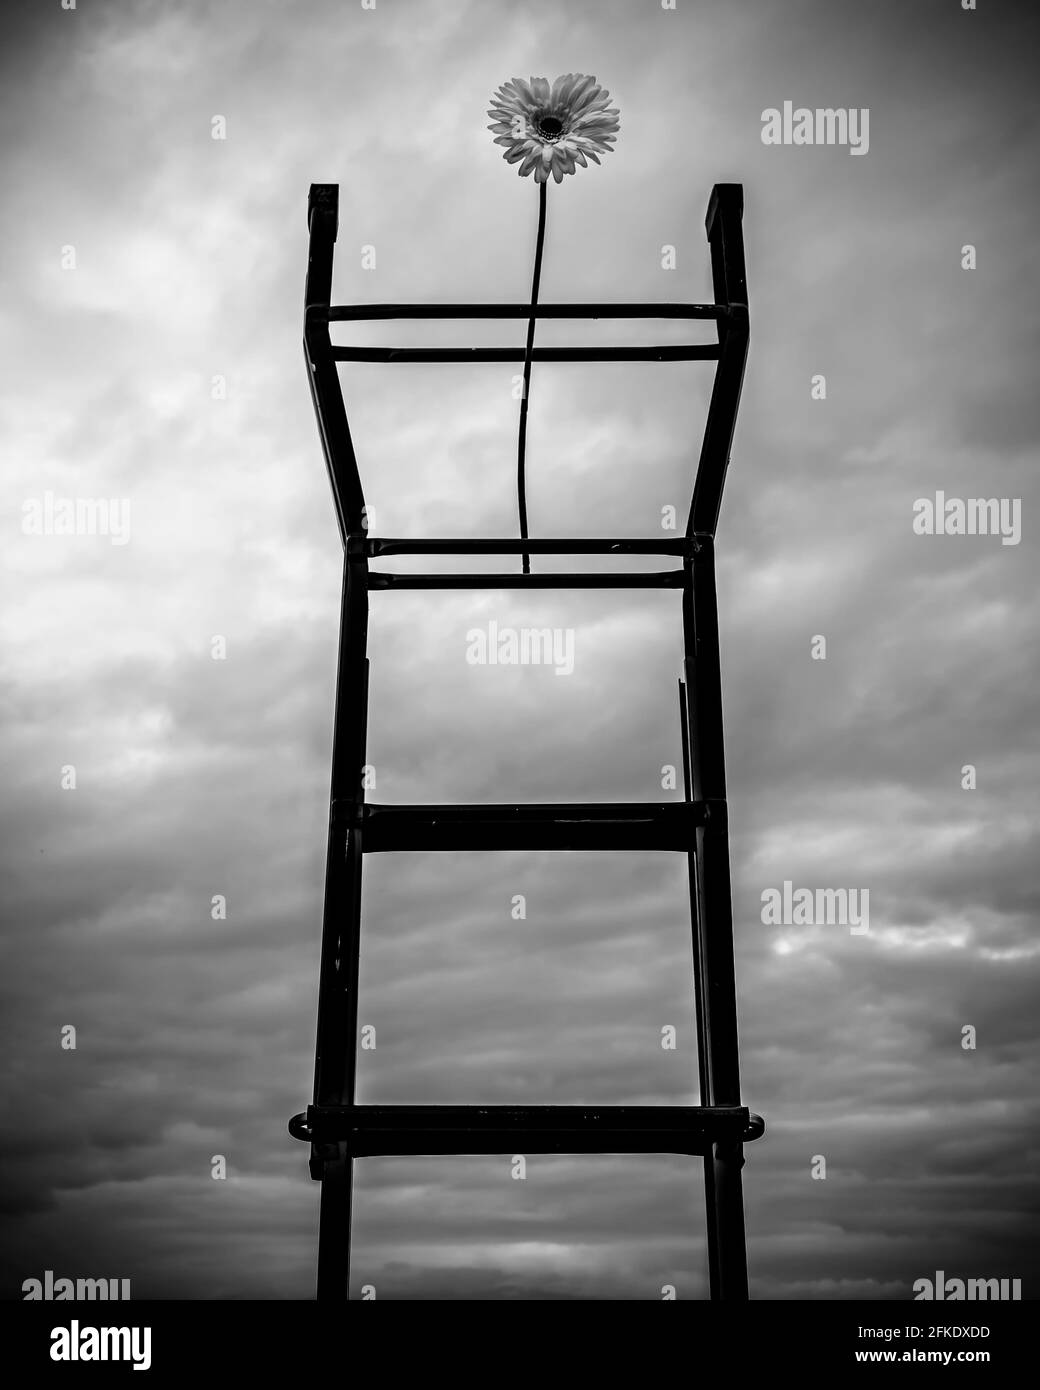 A flower is leaning atop a ladder against a dramatic, black and white sky Stock Photo